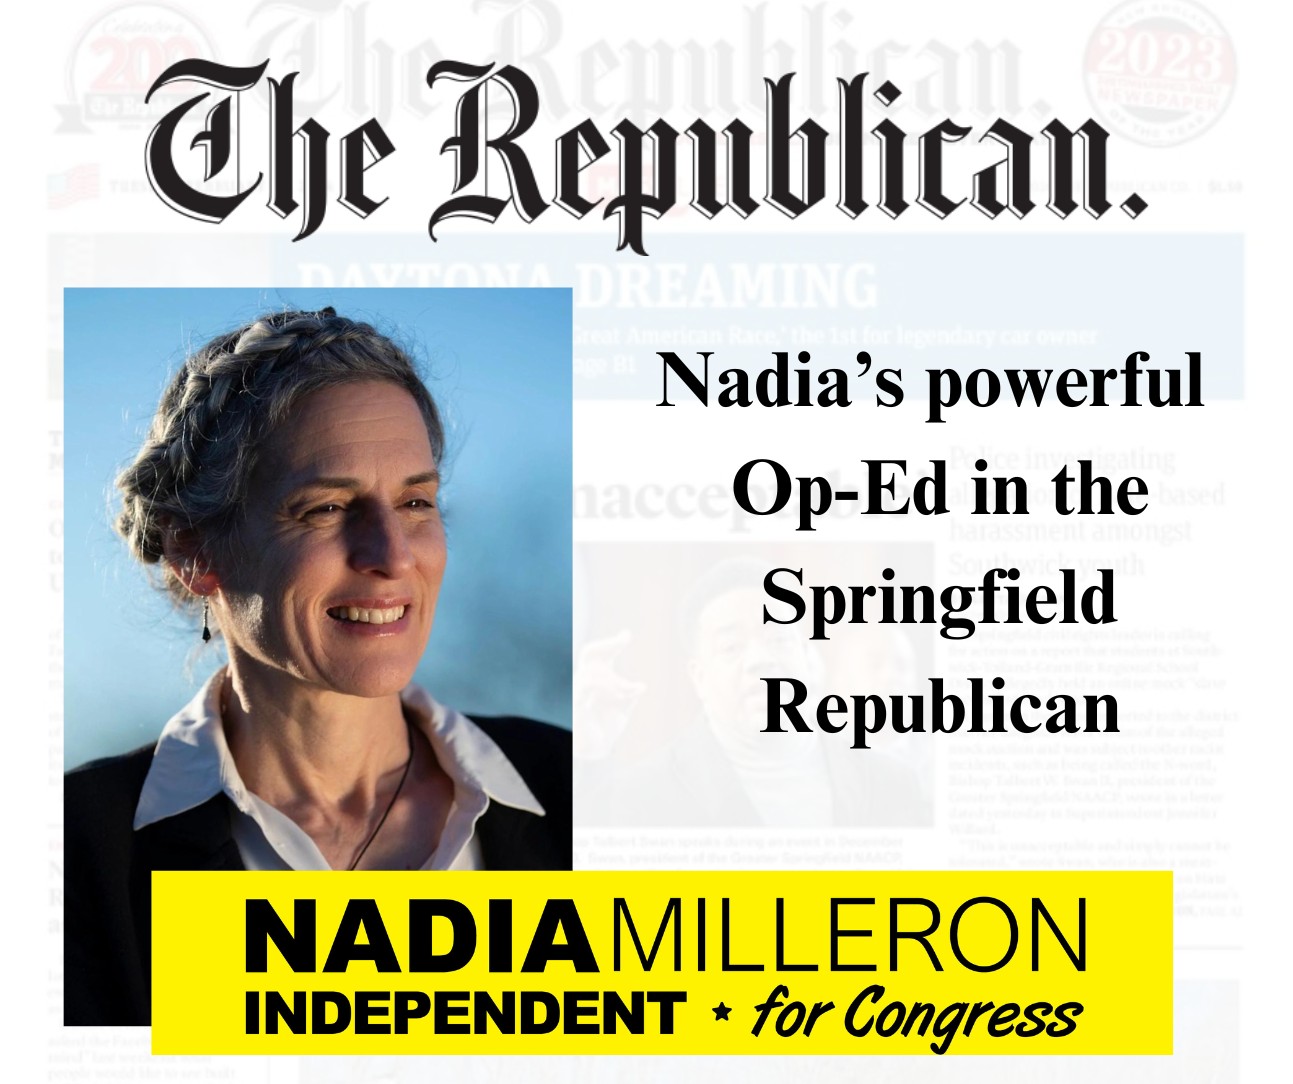 Nadia’s powerful Op-Ed Piece in the Springfield Republican